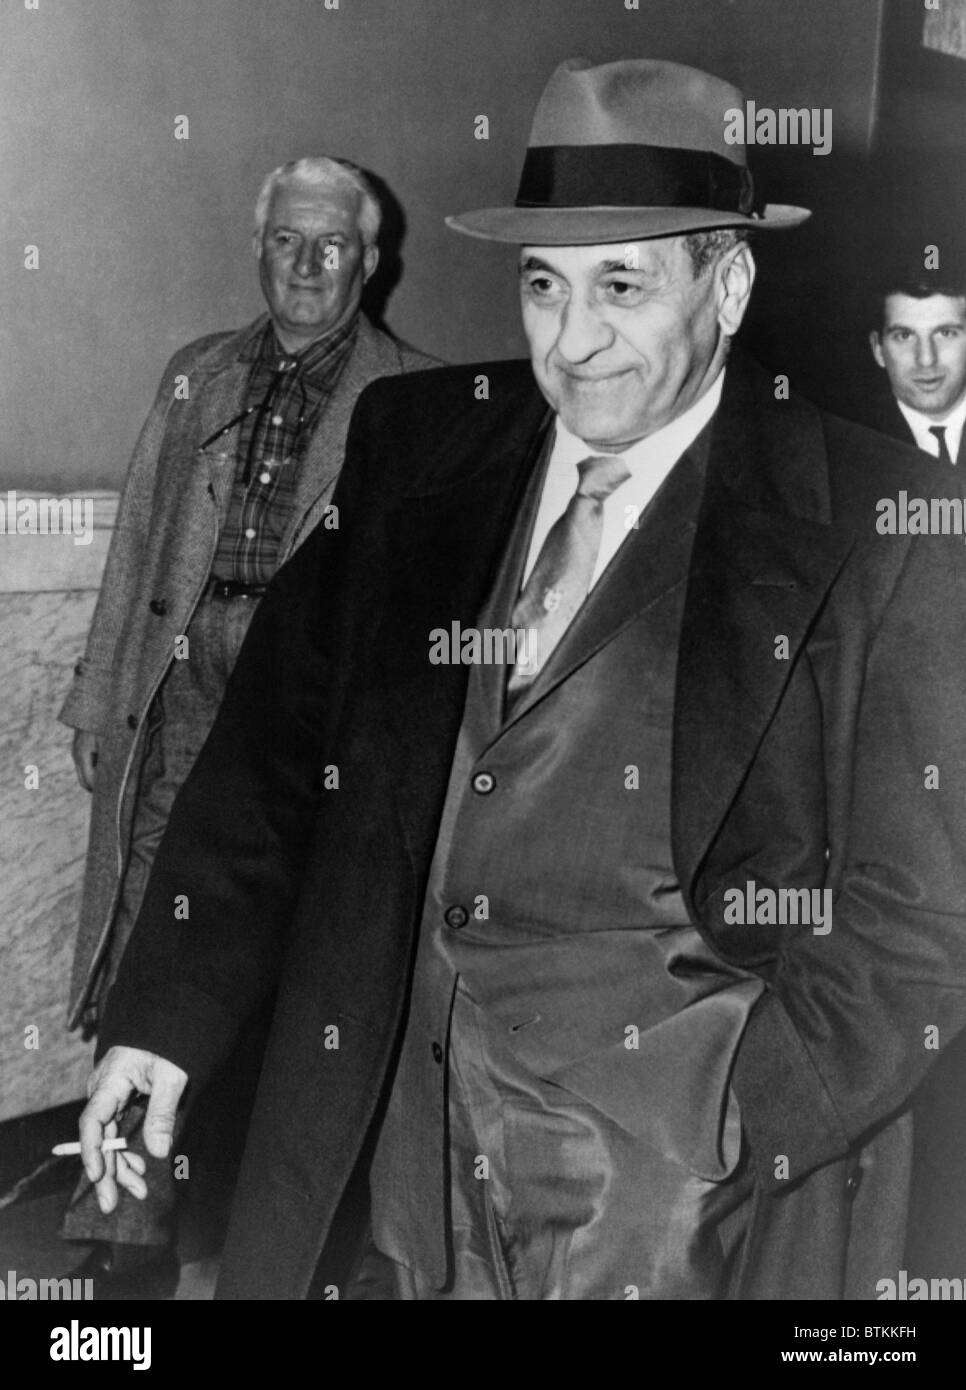 Tony Accardo, successor of Al Capone as boss of the Chicago mob, leaving Federal Building in Chicago after his conviction for tax evasion. In spite of the conviction, Accardo never spent a day in jail. Nov. 11, 1960. Stock Photo